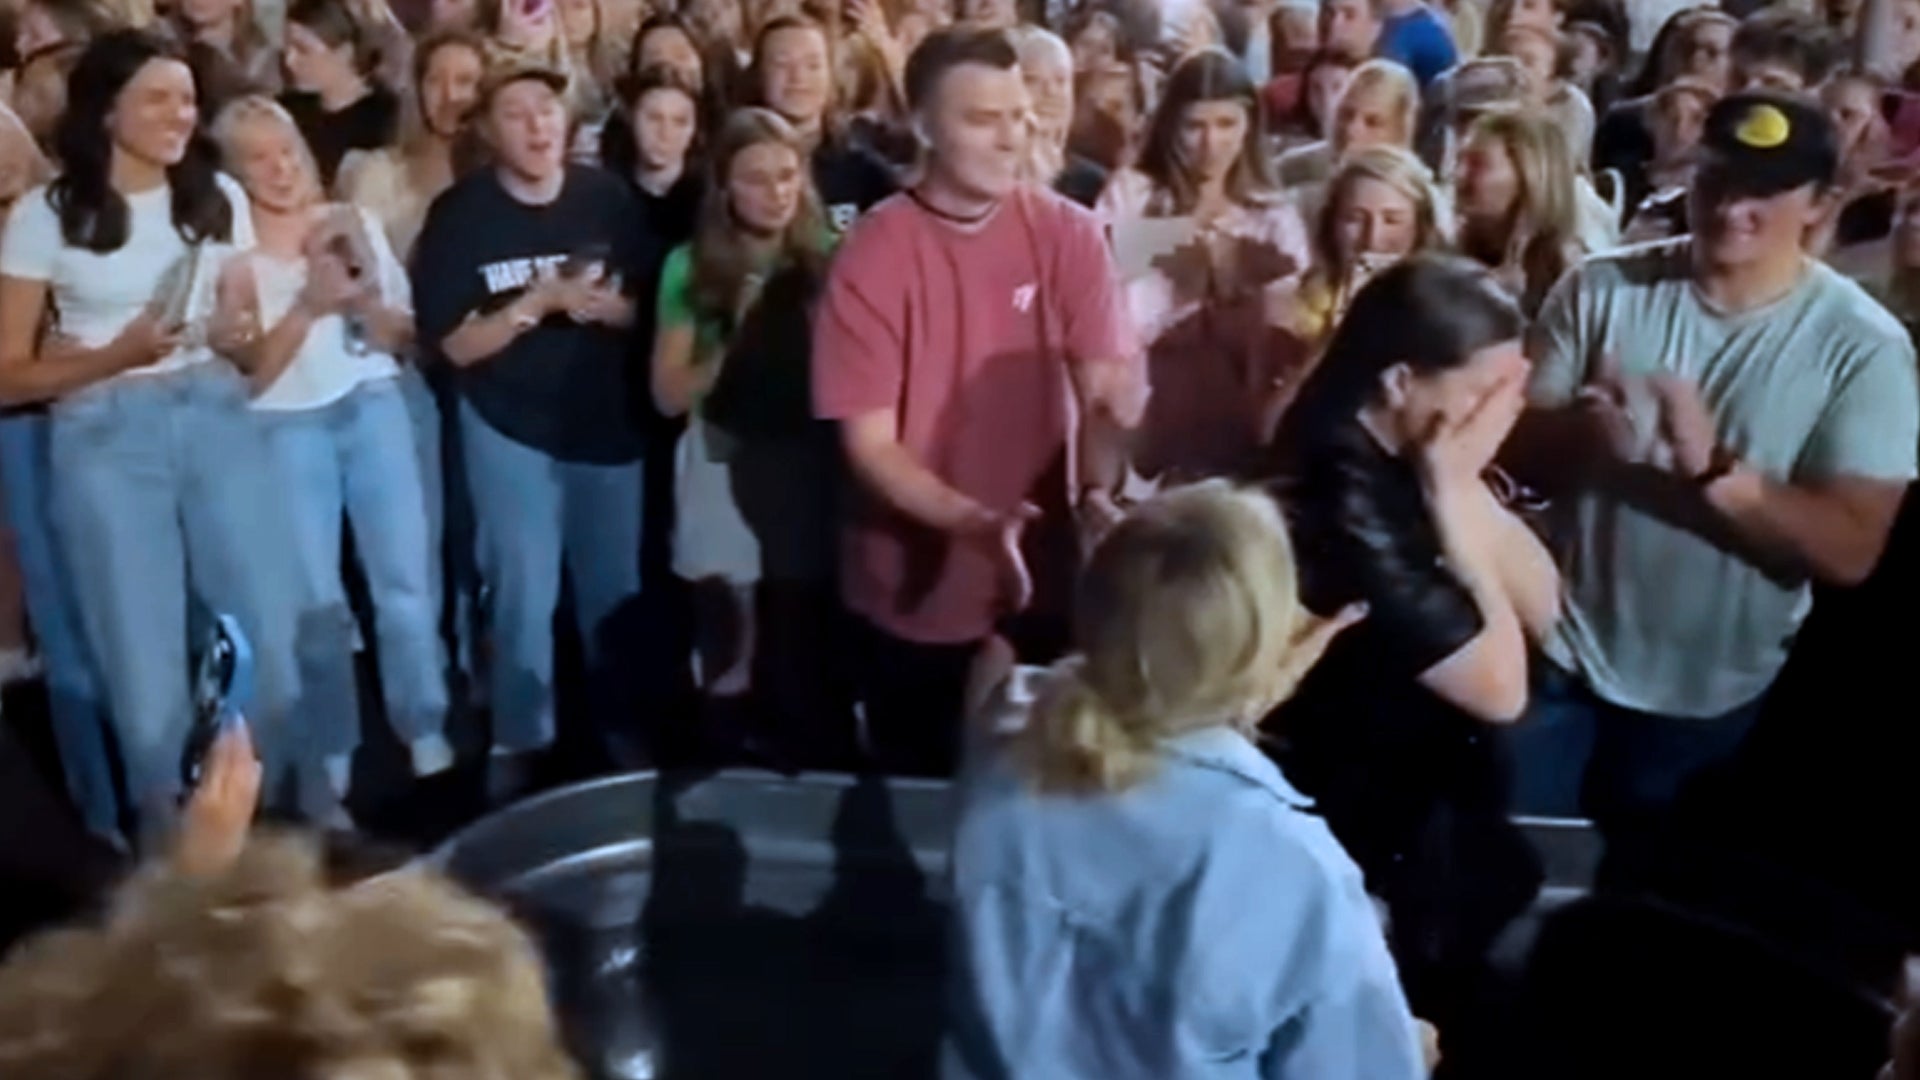 Hundreds of Gen Zers Make Decisions for Jesus at University of Tennessee: 'God Is Moving!'